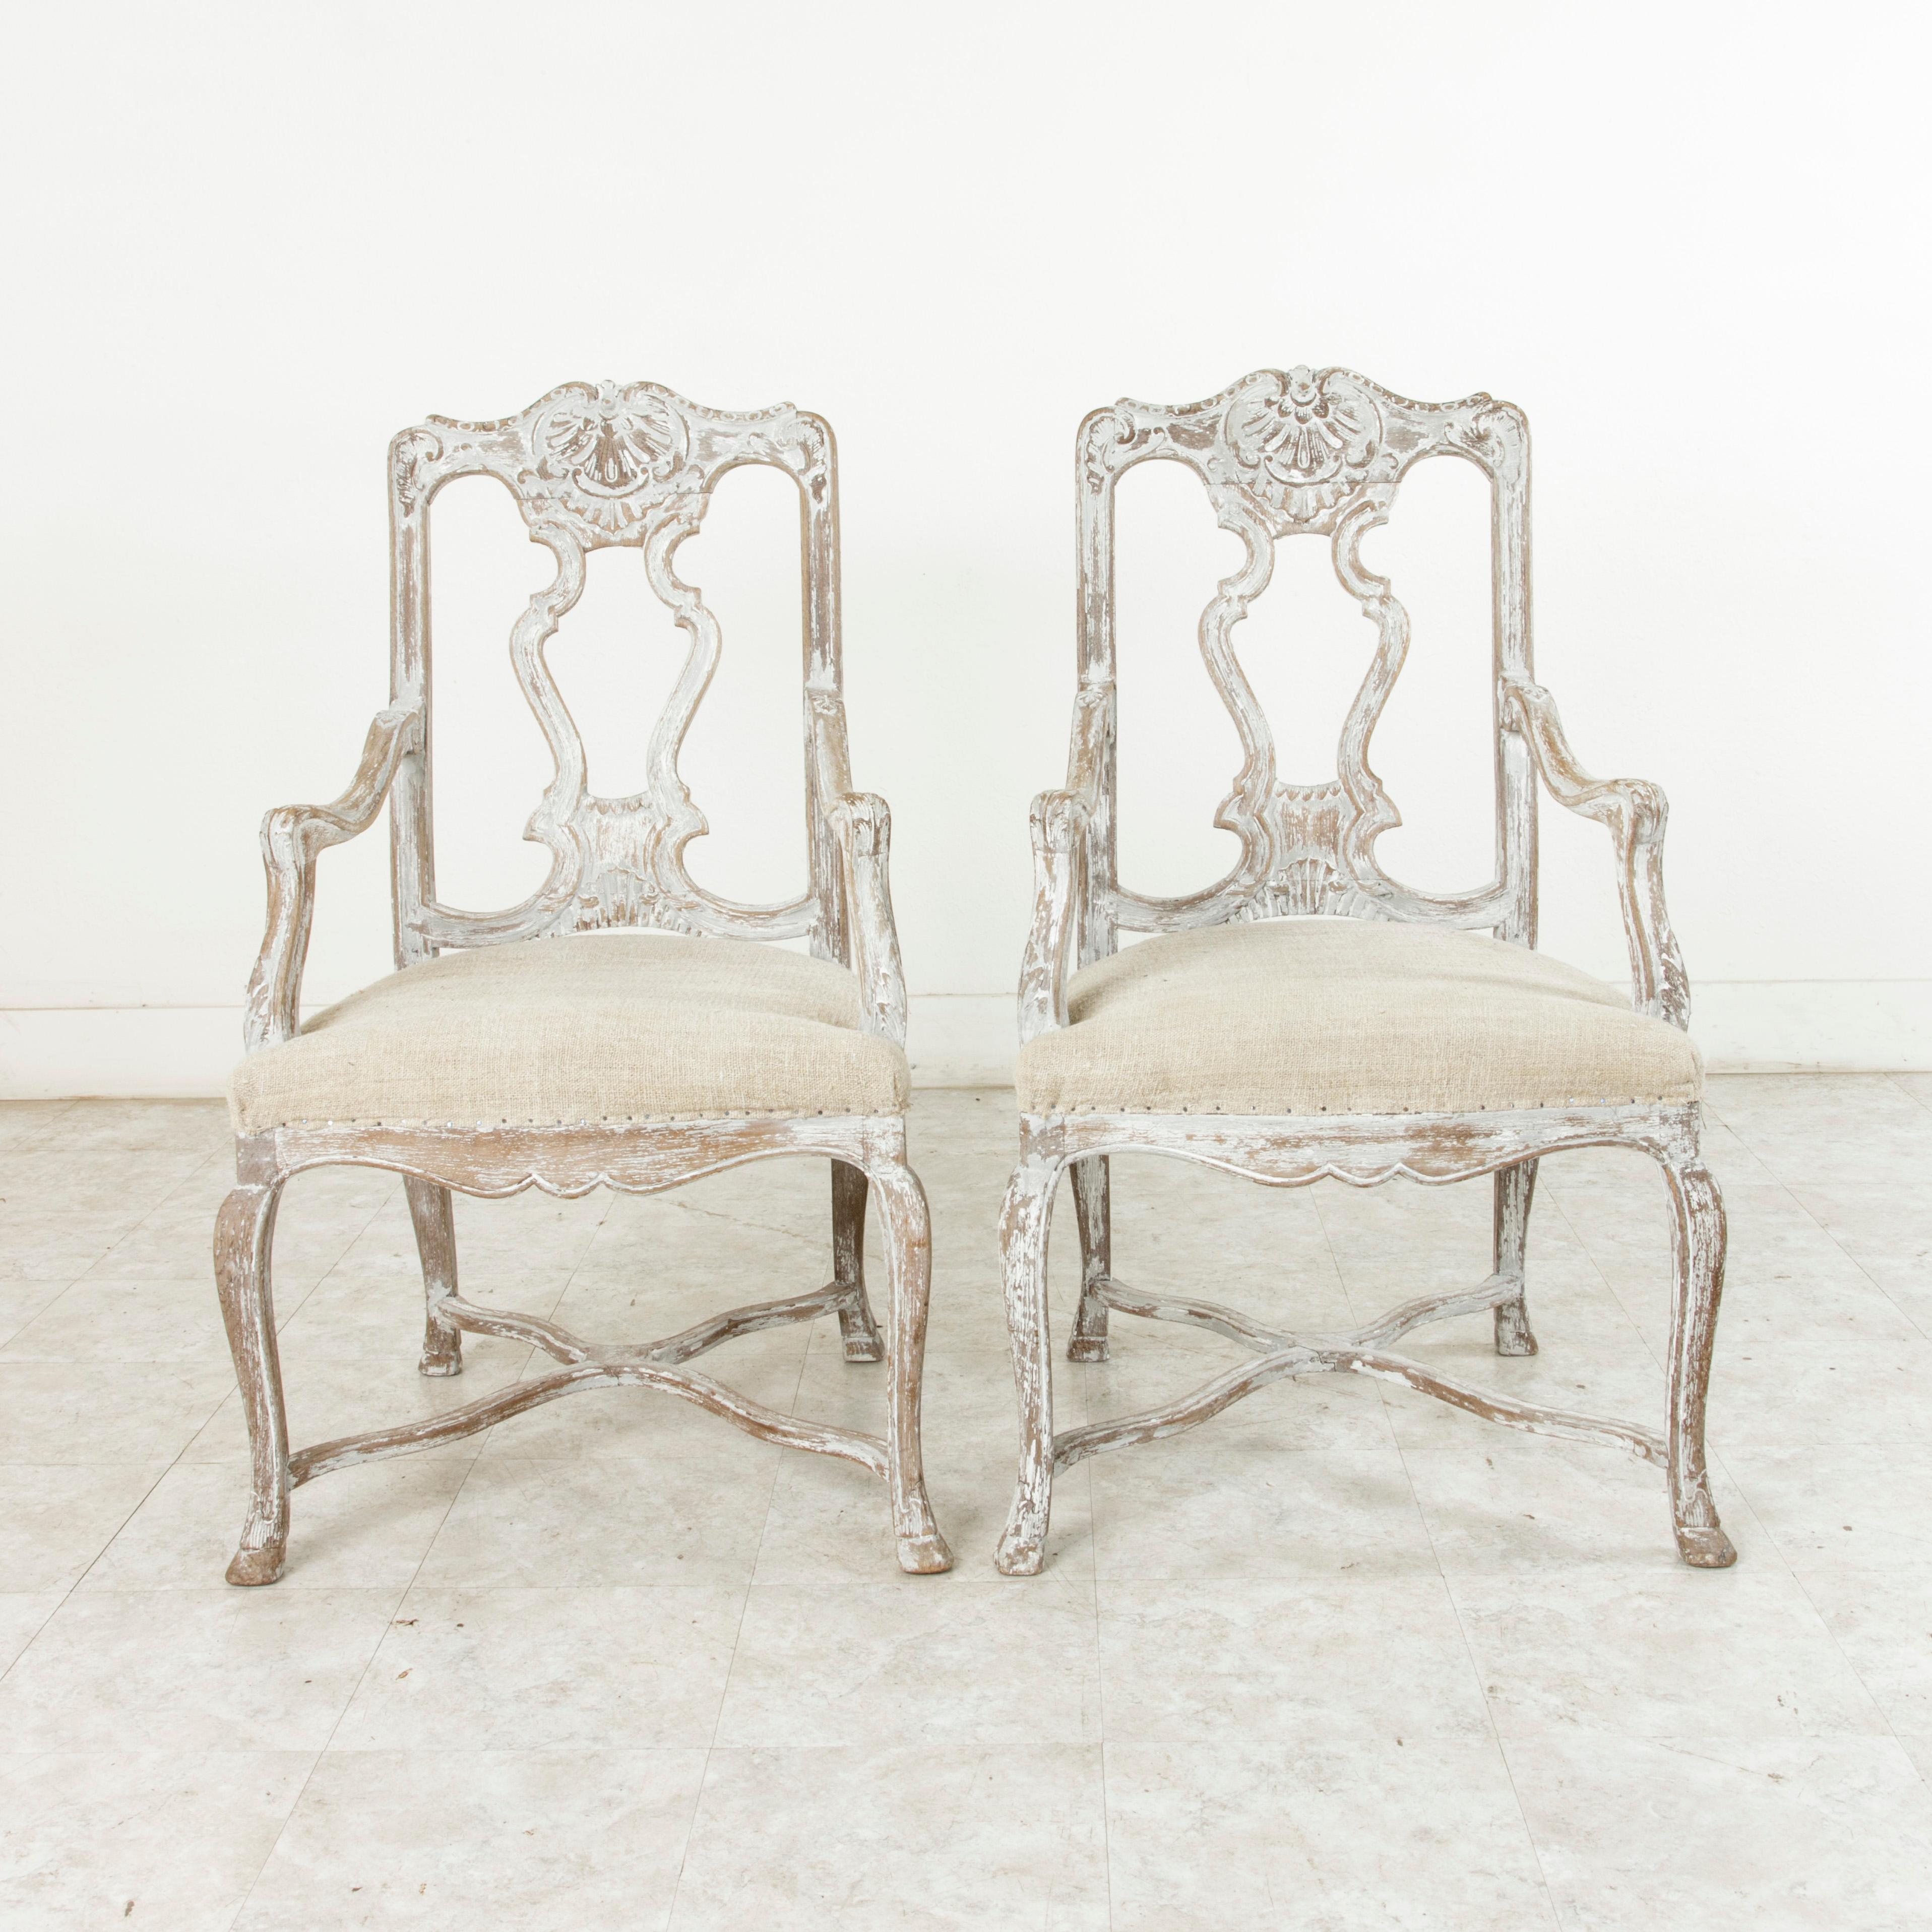 Painted Set of Six Late 19th Century French Regency Style Hand-Carved Oak Dining Chairs